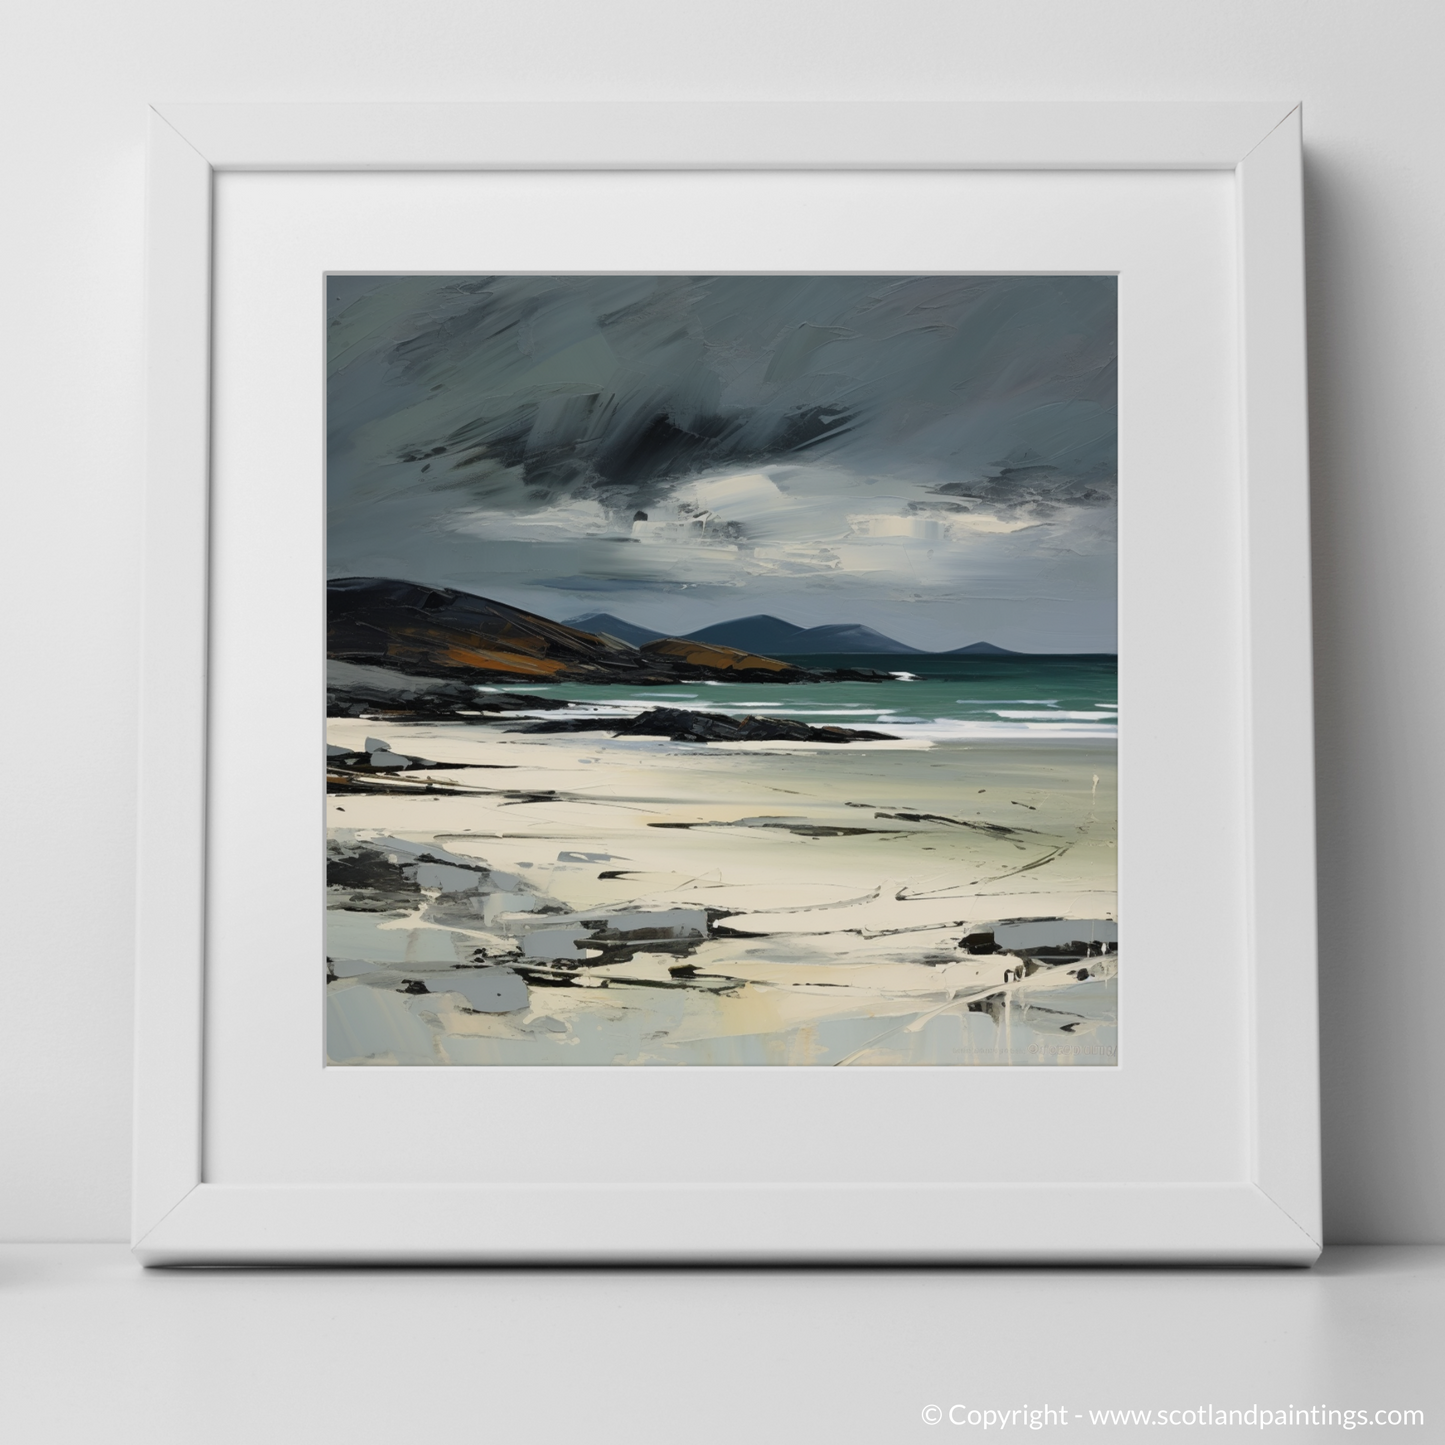 Art Print of Traigh Mhor, Isle of Barra with a white frame